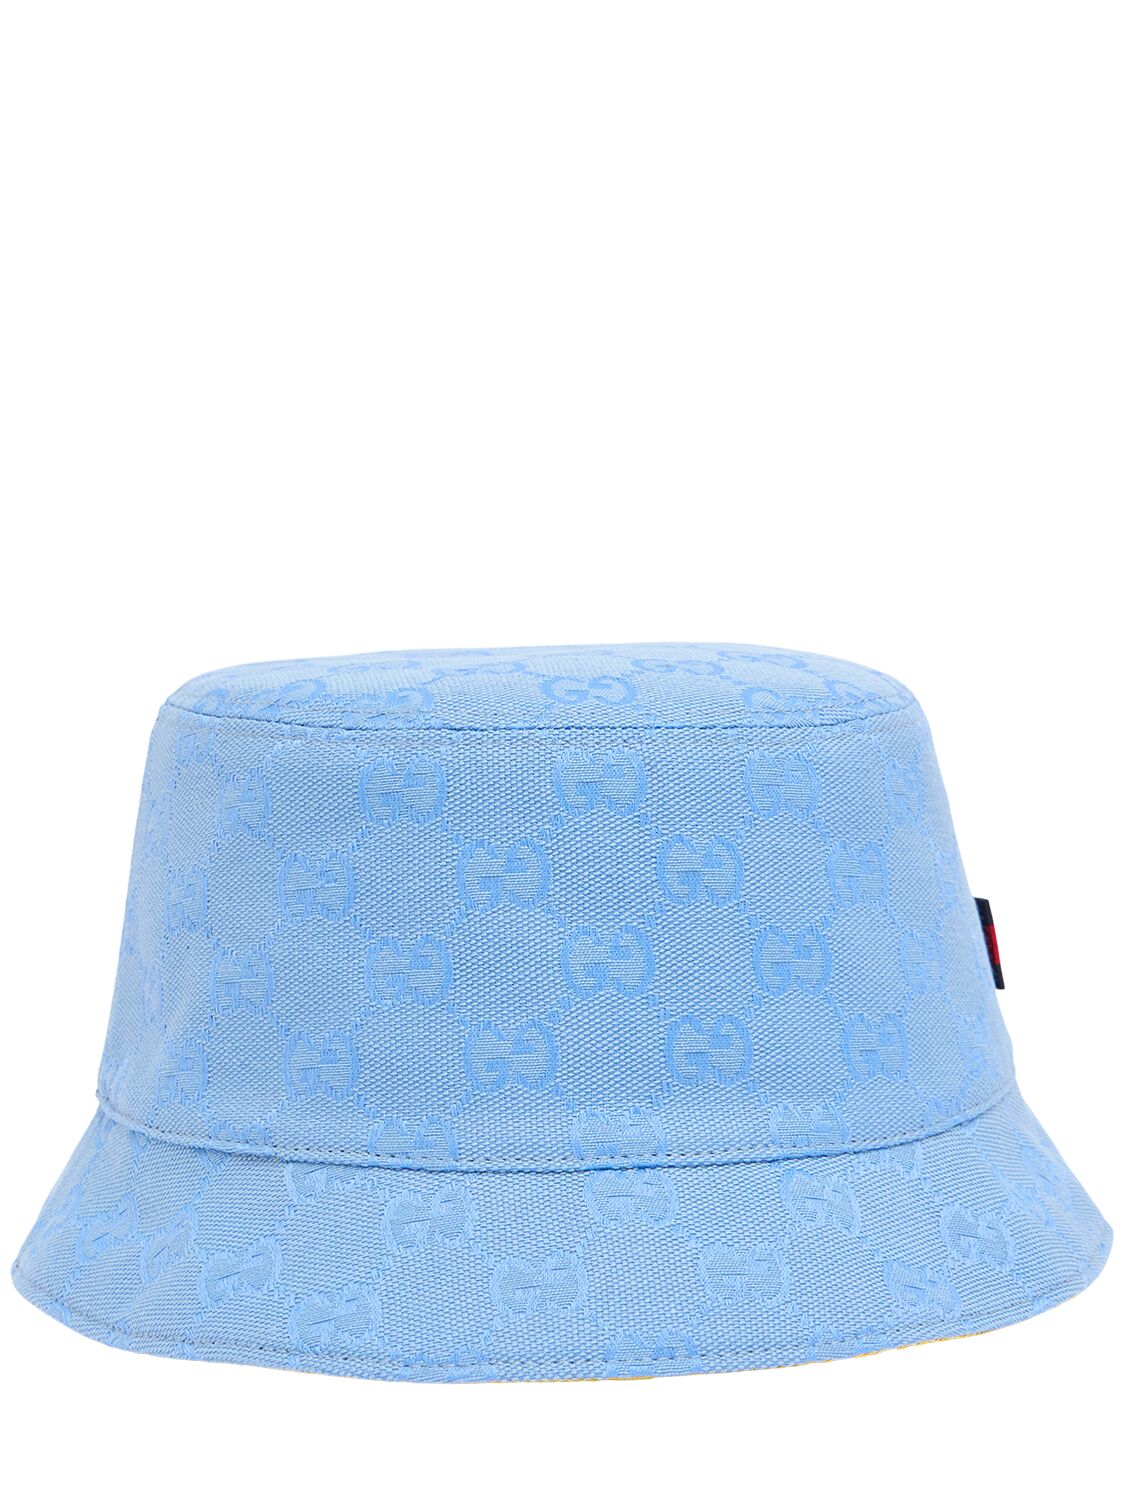 Gucci Canvas Bucket Hat In Mindful Azure